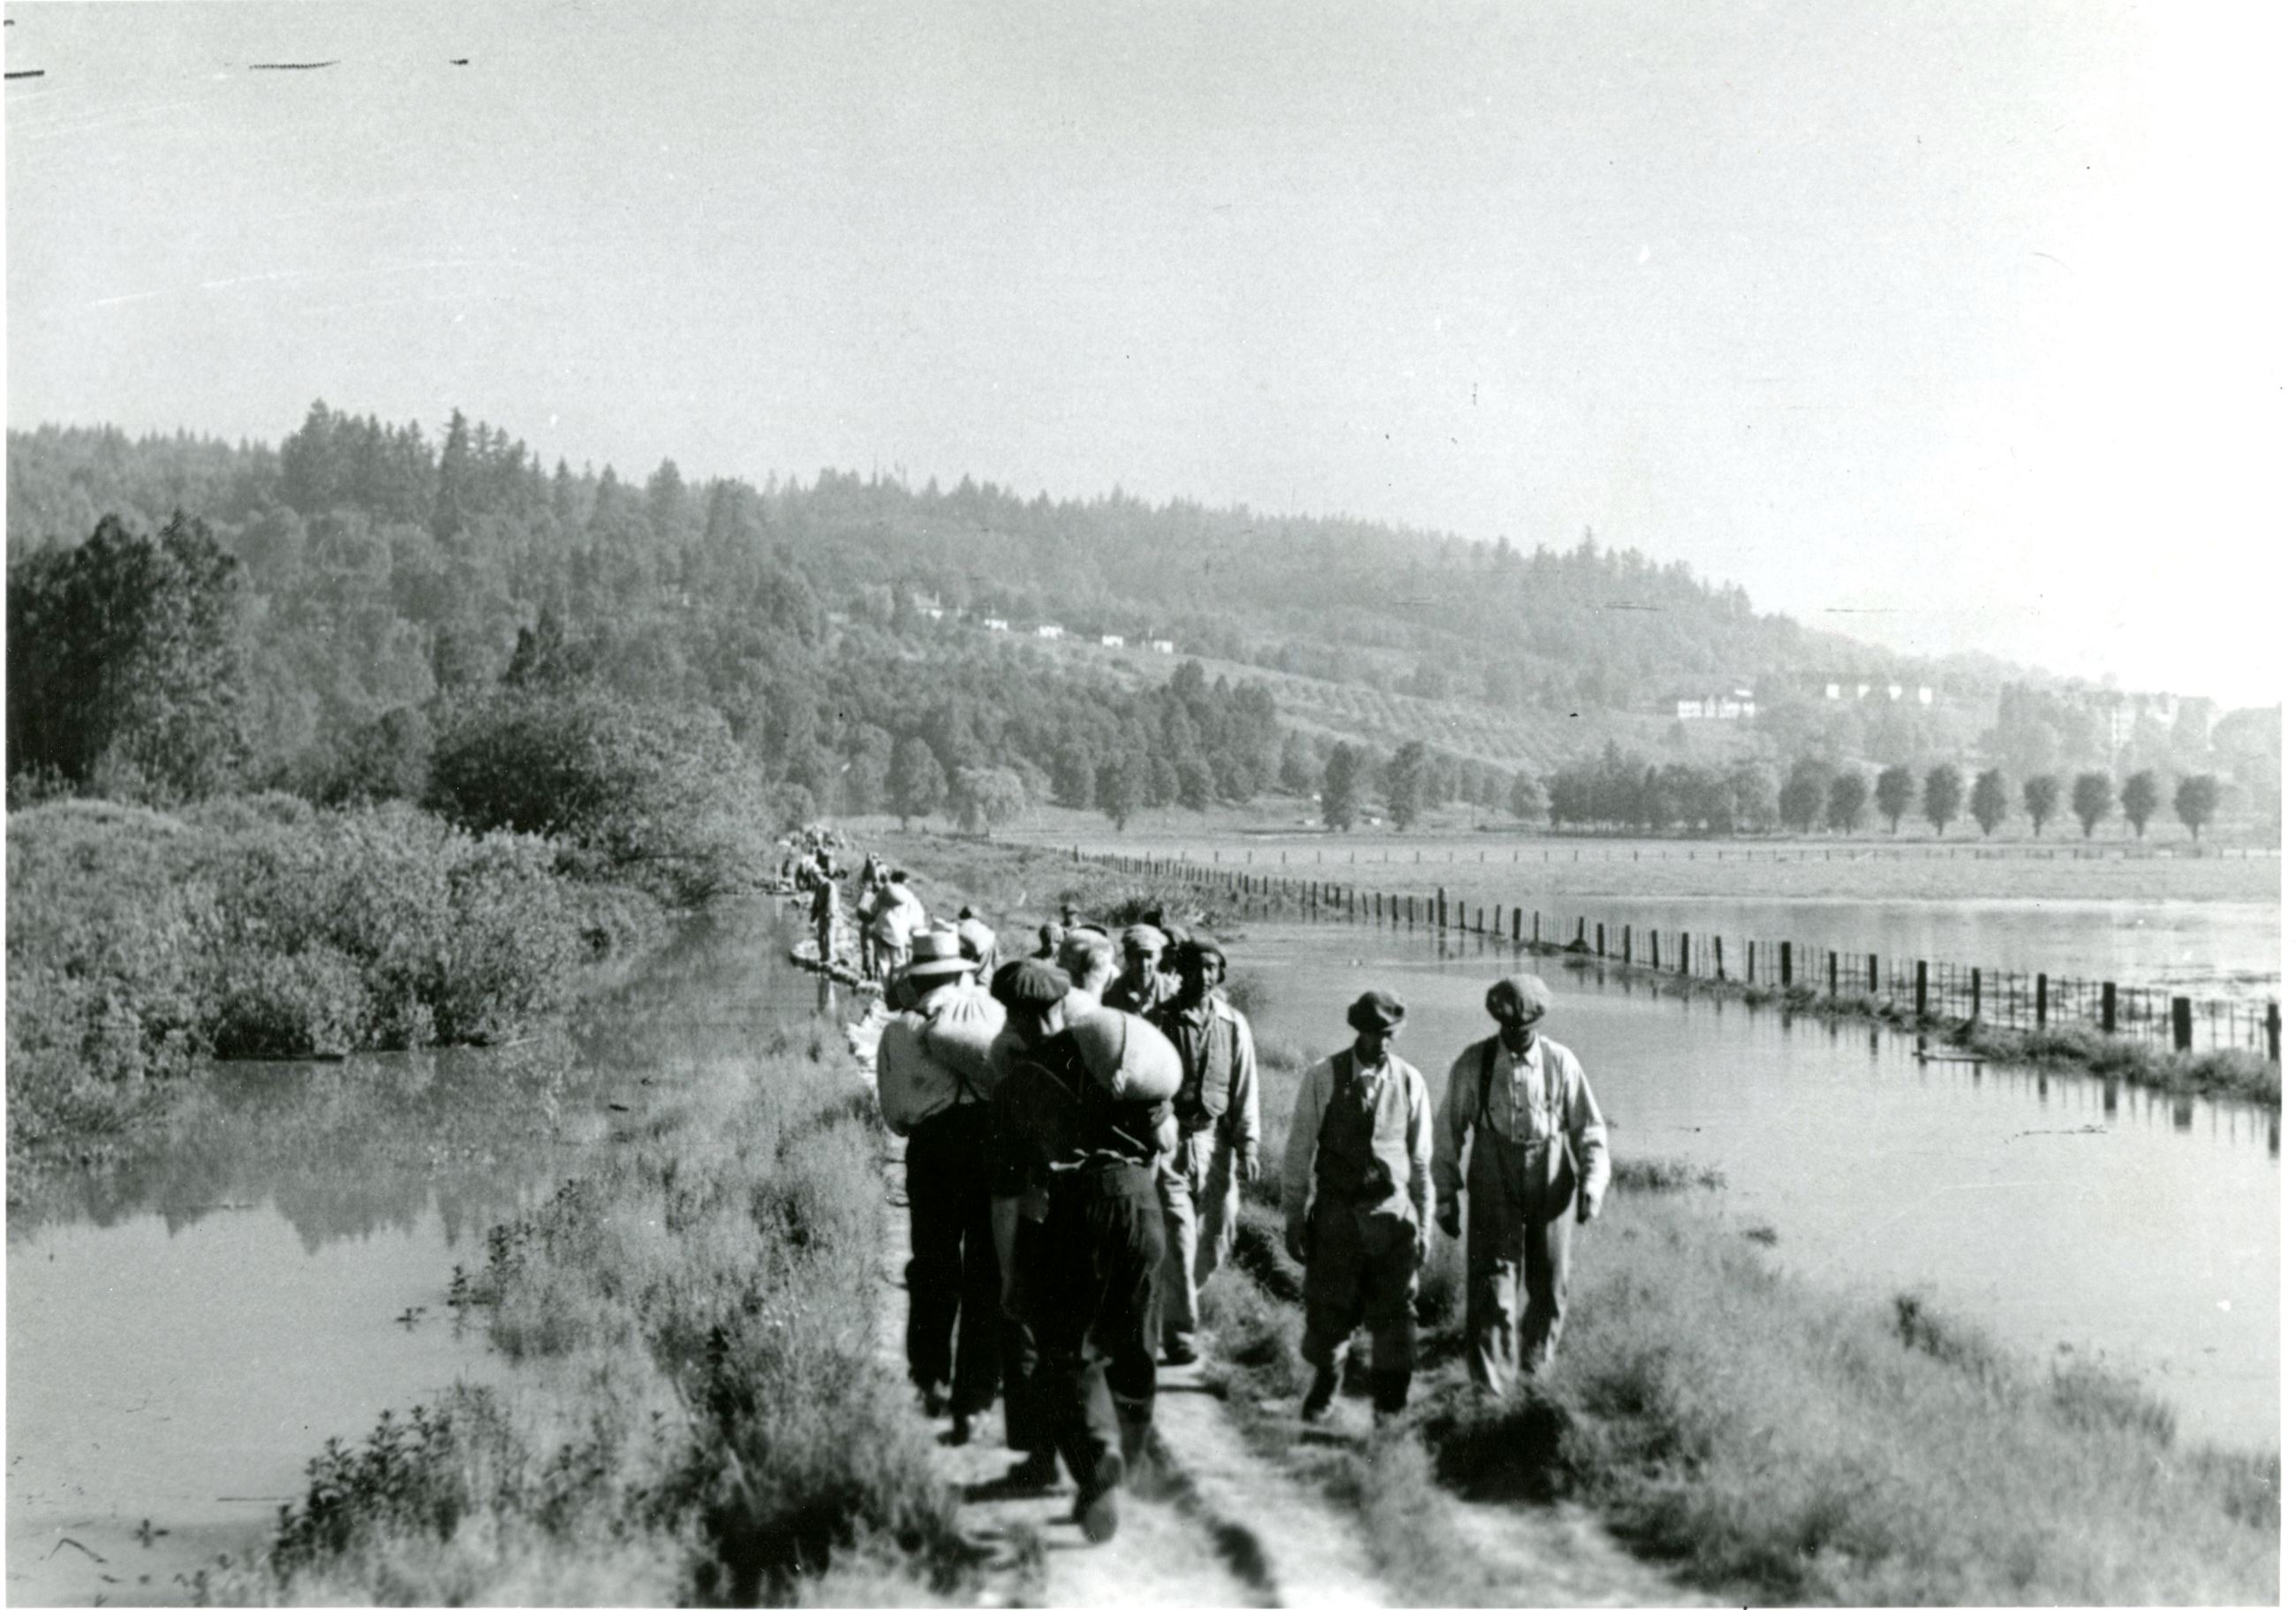 Strengthening the dykes at Colony Farm, 1948 (Source City of Coquitlam Archives, C6.1086) Opens in new window